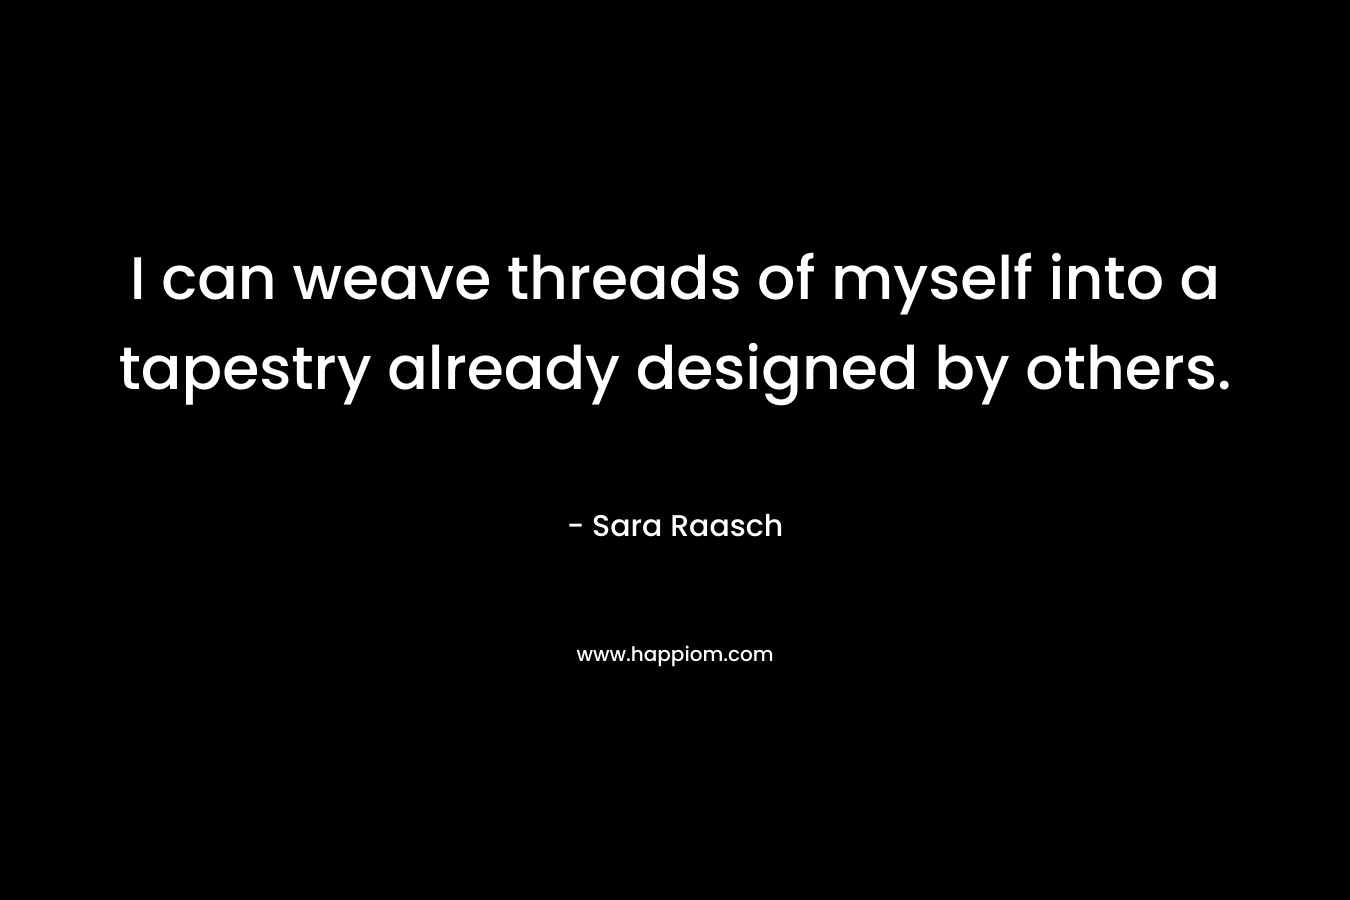 I can weave threads of myself into a tapestry already designed by others.